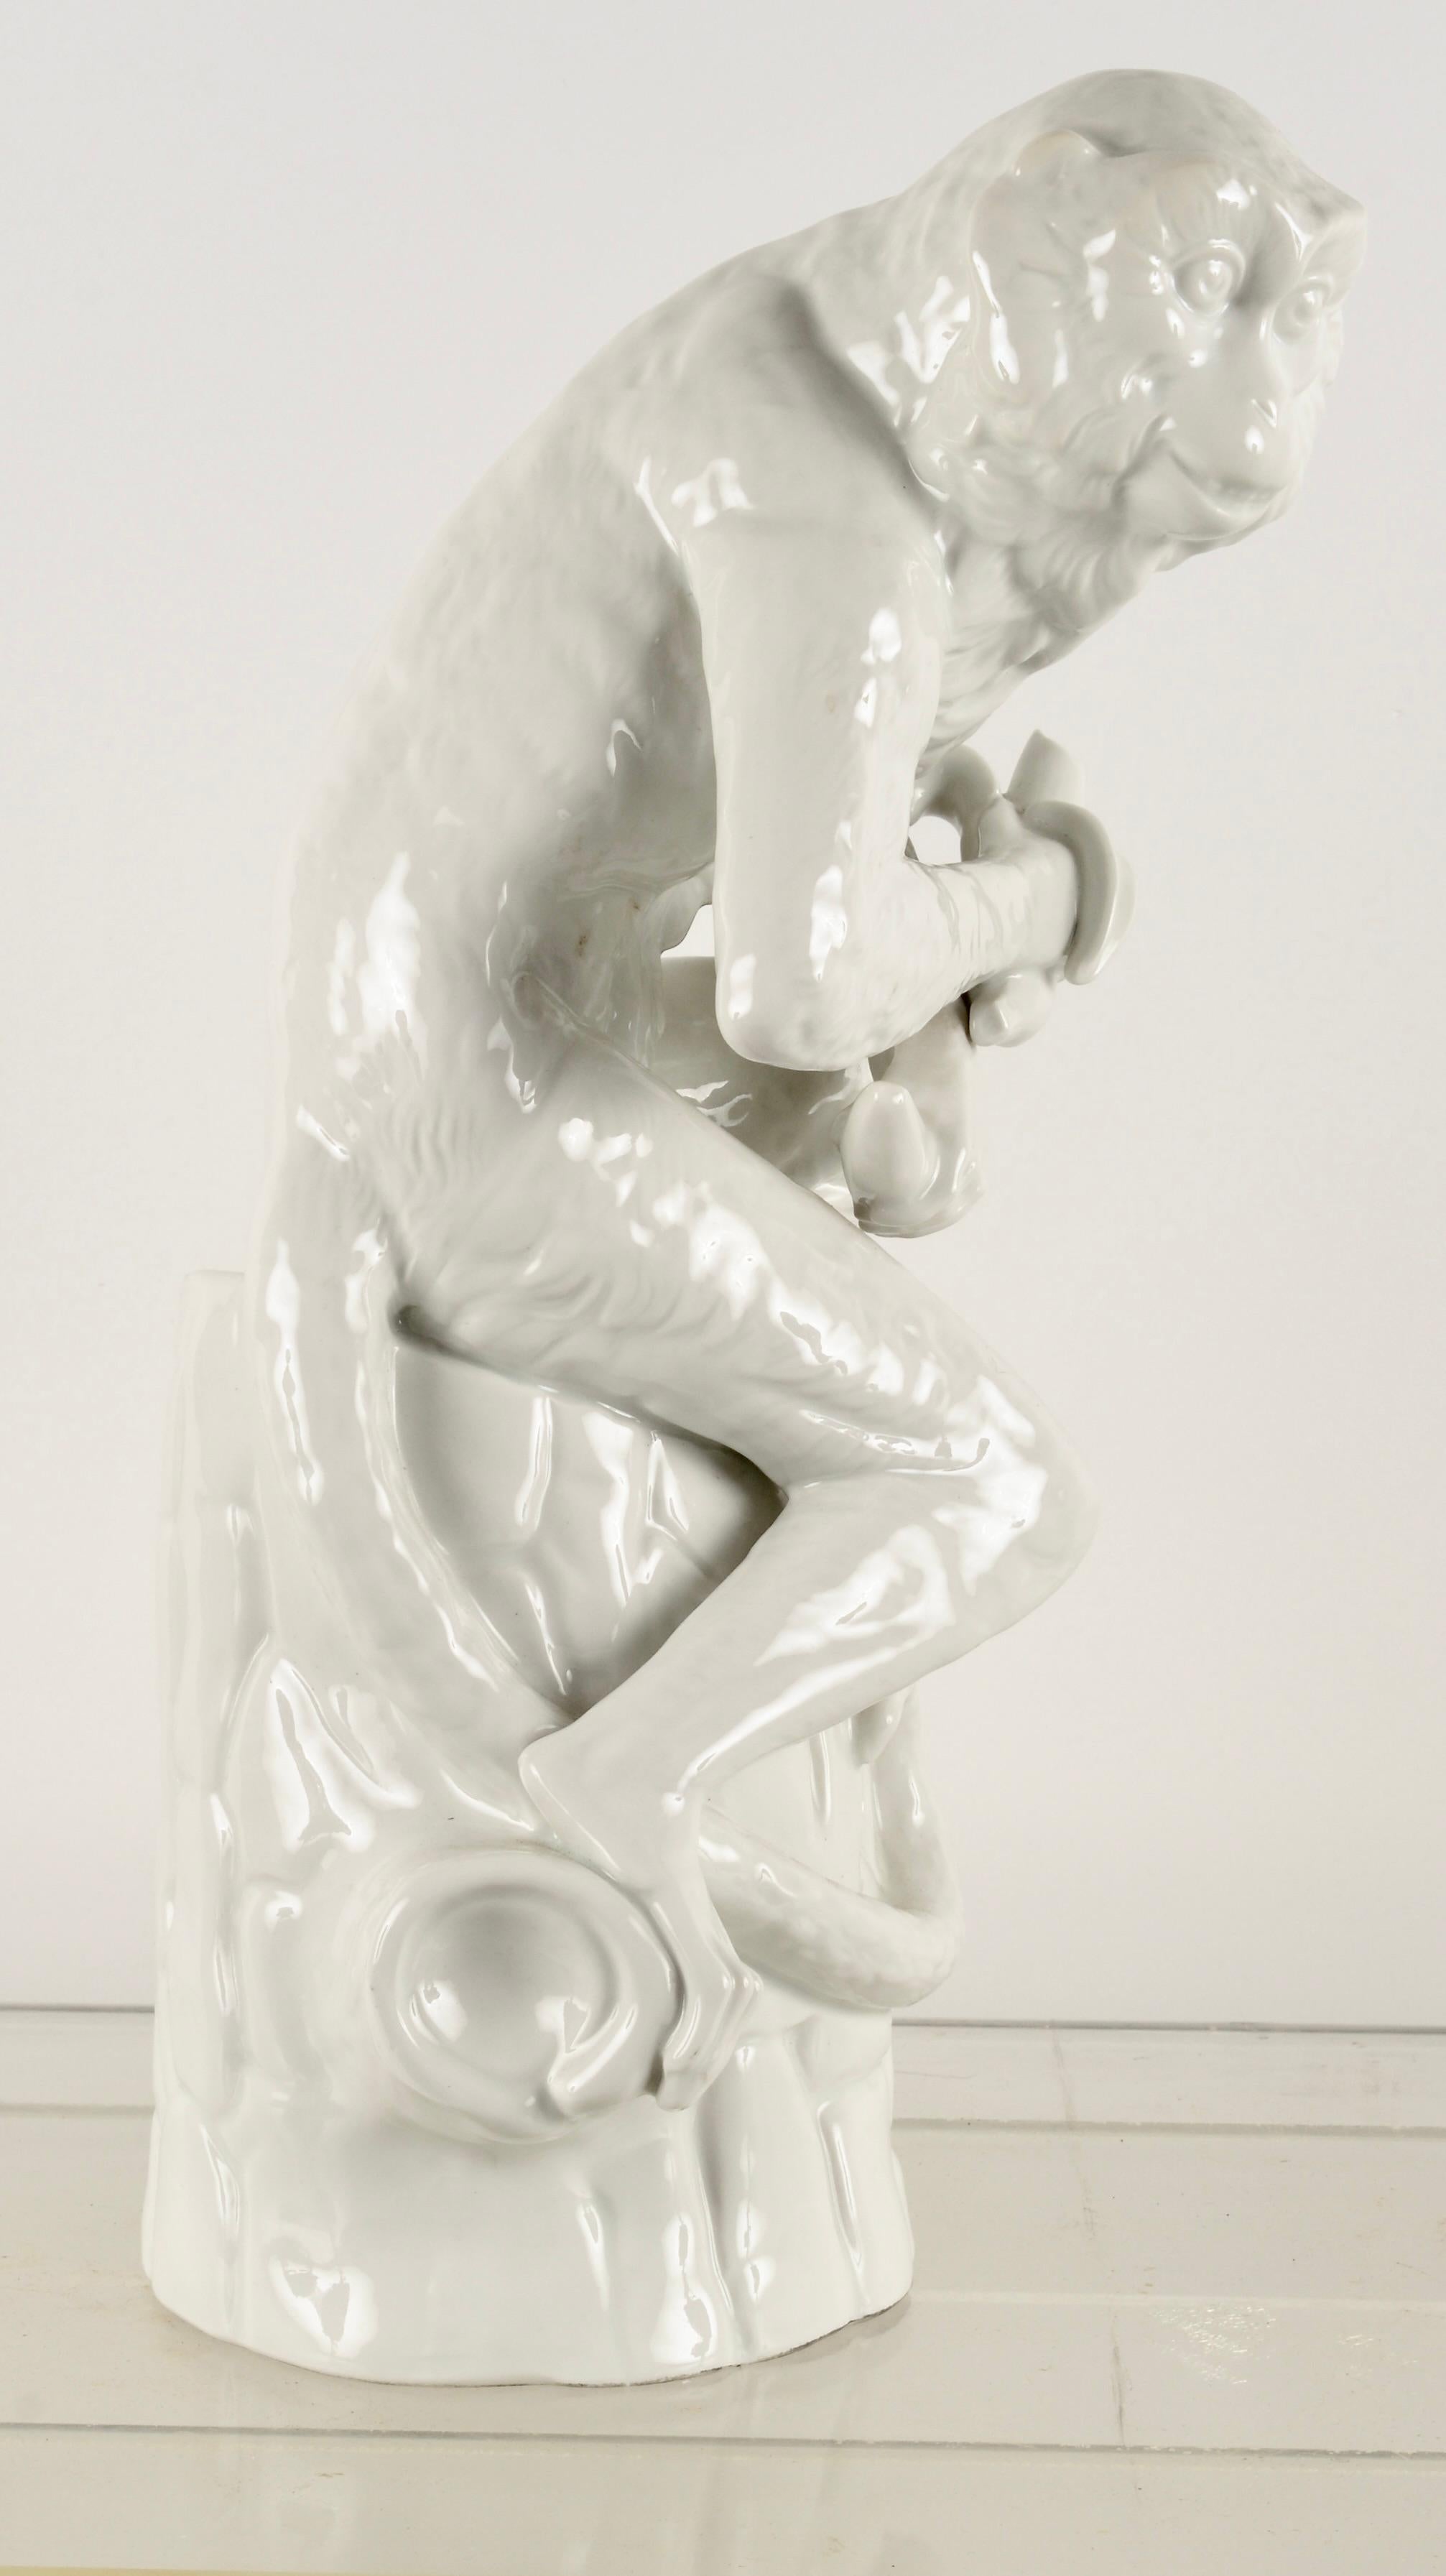 KPM Blanc de Chine Monkey Sculpture, Germany 1960s In Good Condition For Sale In Norwalk, CT